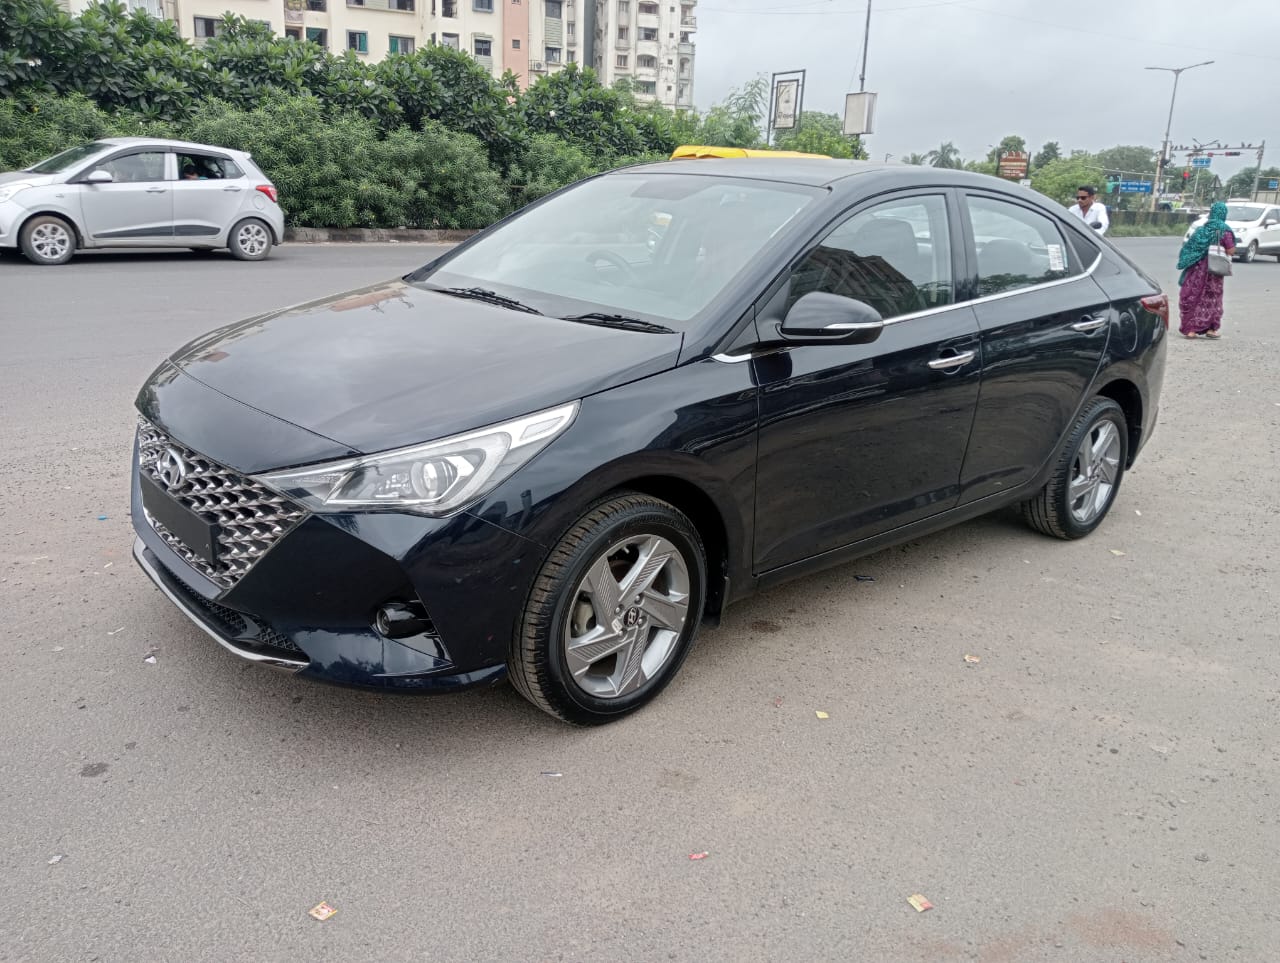 Details View - Hyundai Verna photos - reseller,reseller marketplace,advetising your products,reseller bazzar,resellerbazzar.in,india's classified site,Hyundai Varna , Old Hyundai Varna , Used Hyundai Varna  in Ahmedabad , Hyundai Varna in Ahmedabad